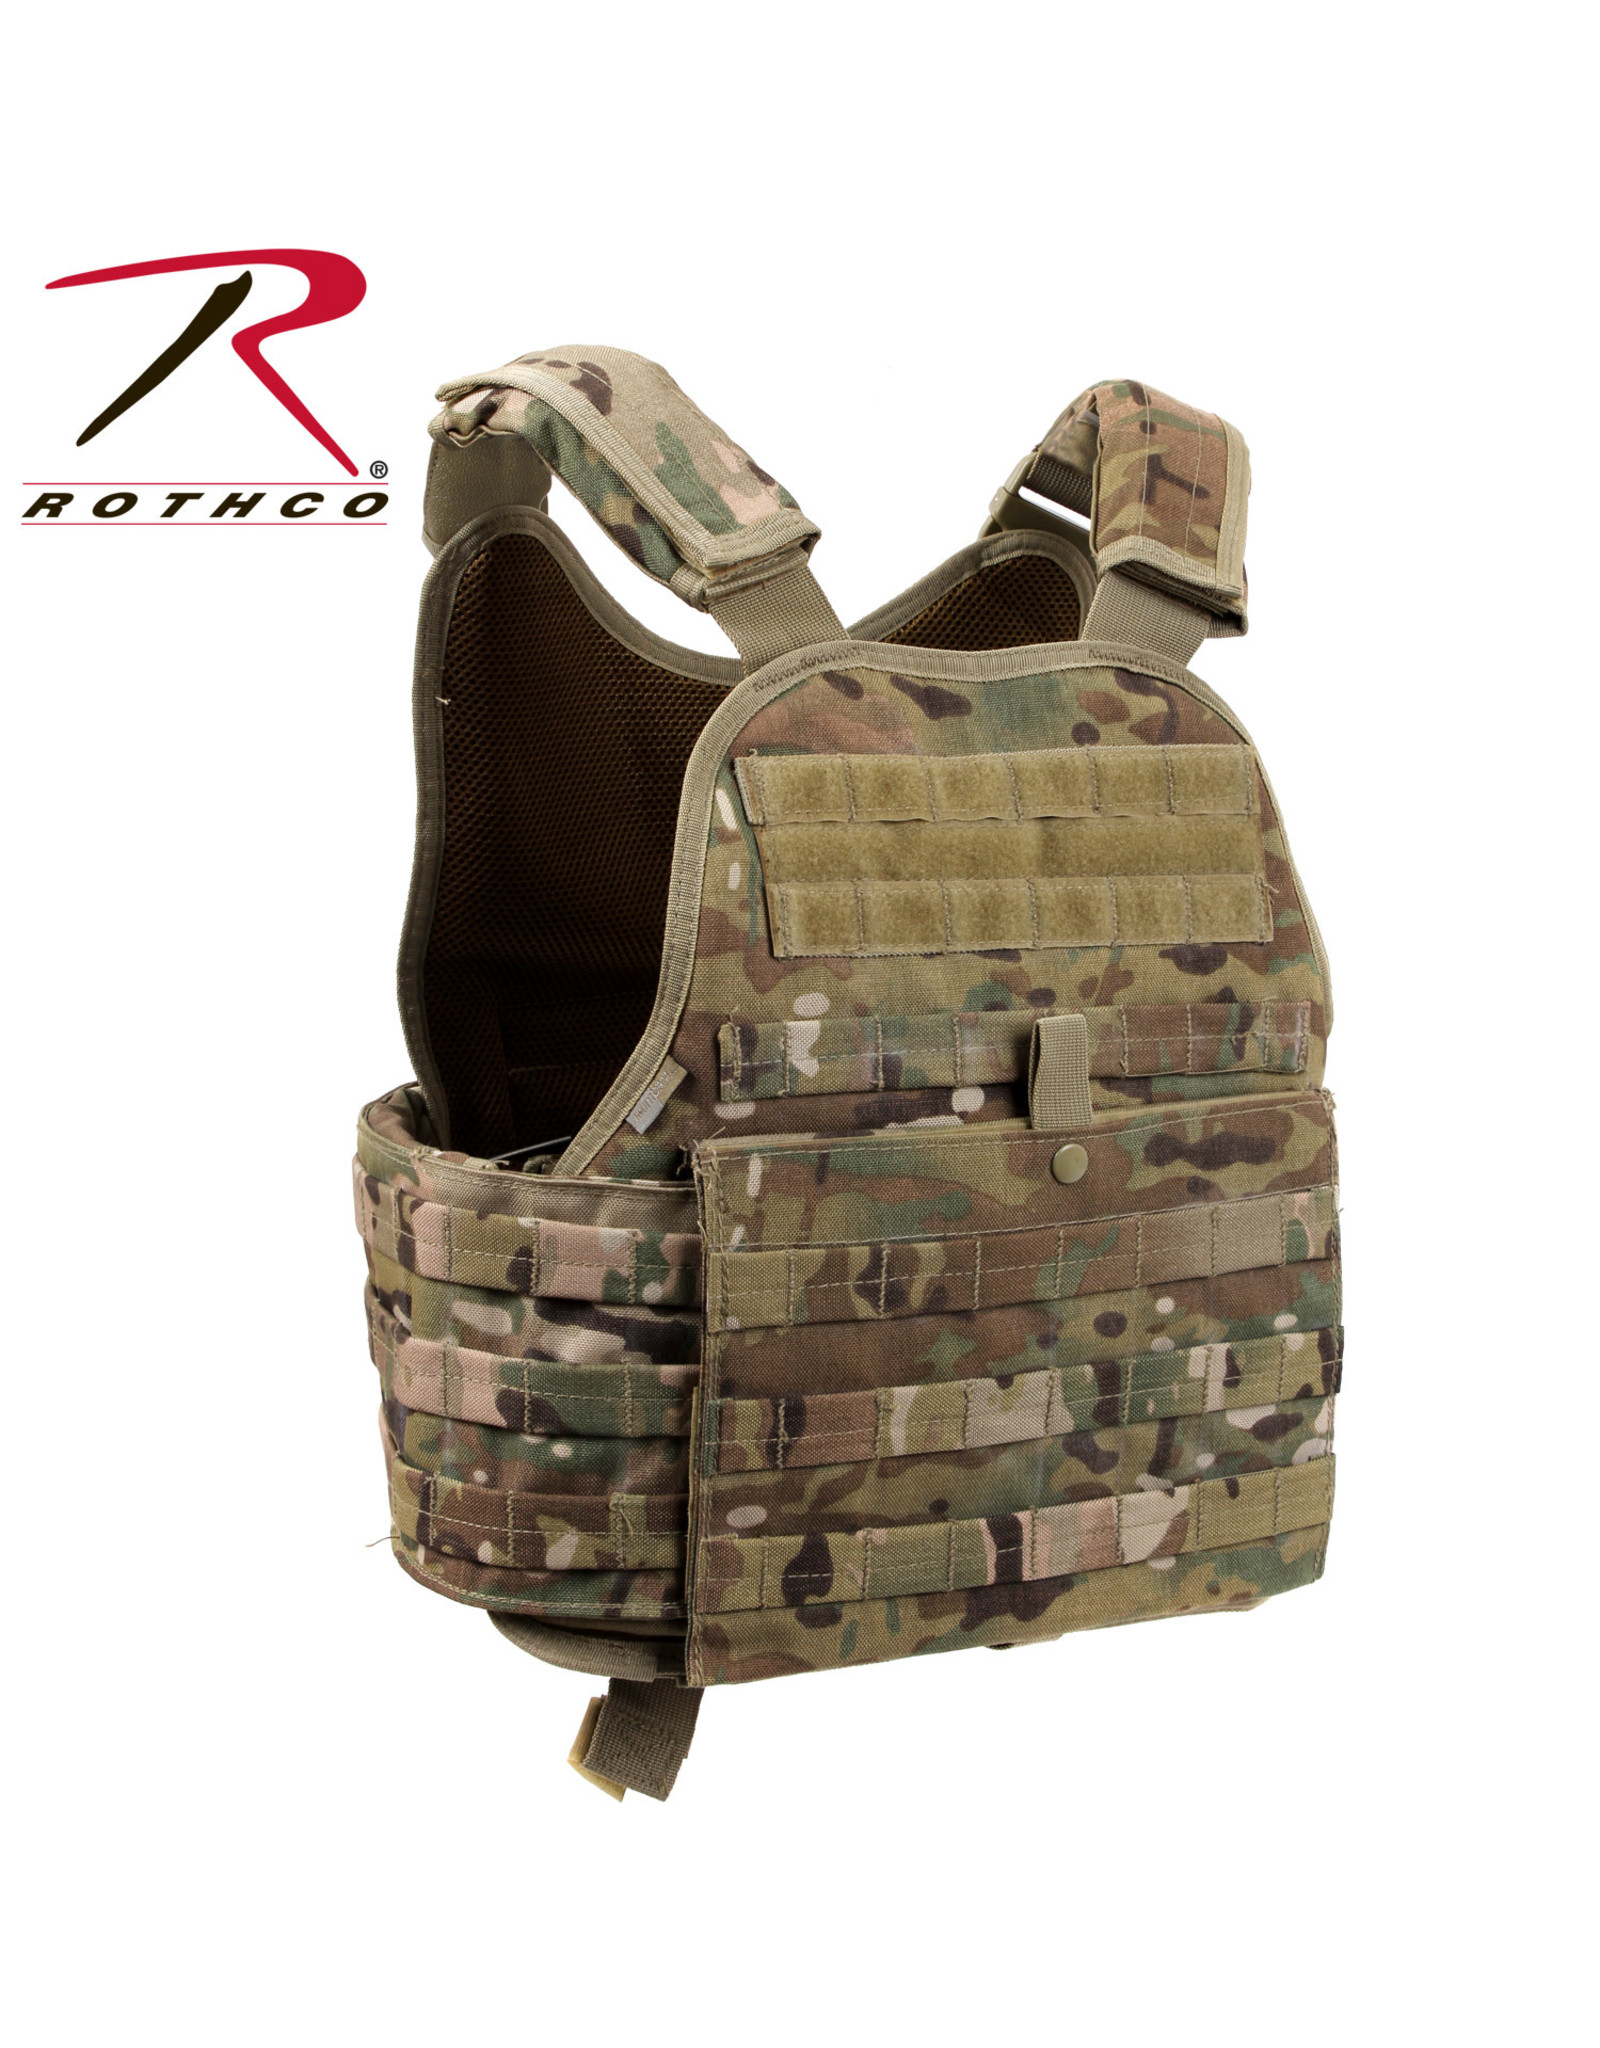 Rothco M/A Plate Carrier Vest